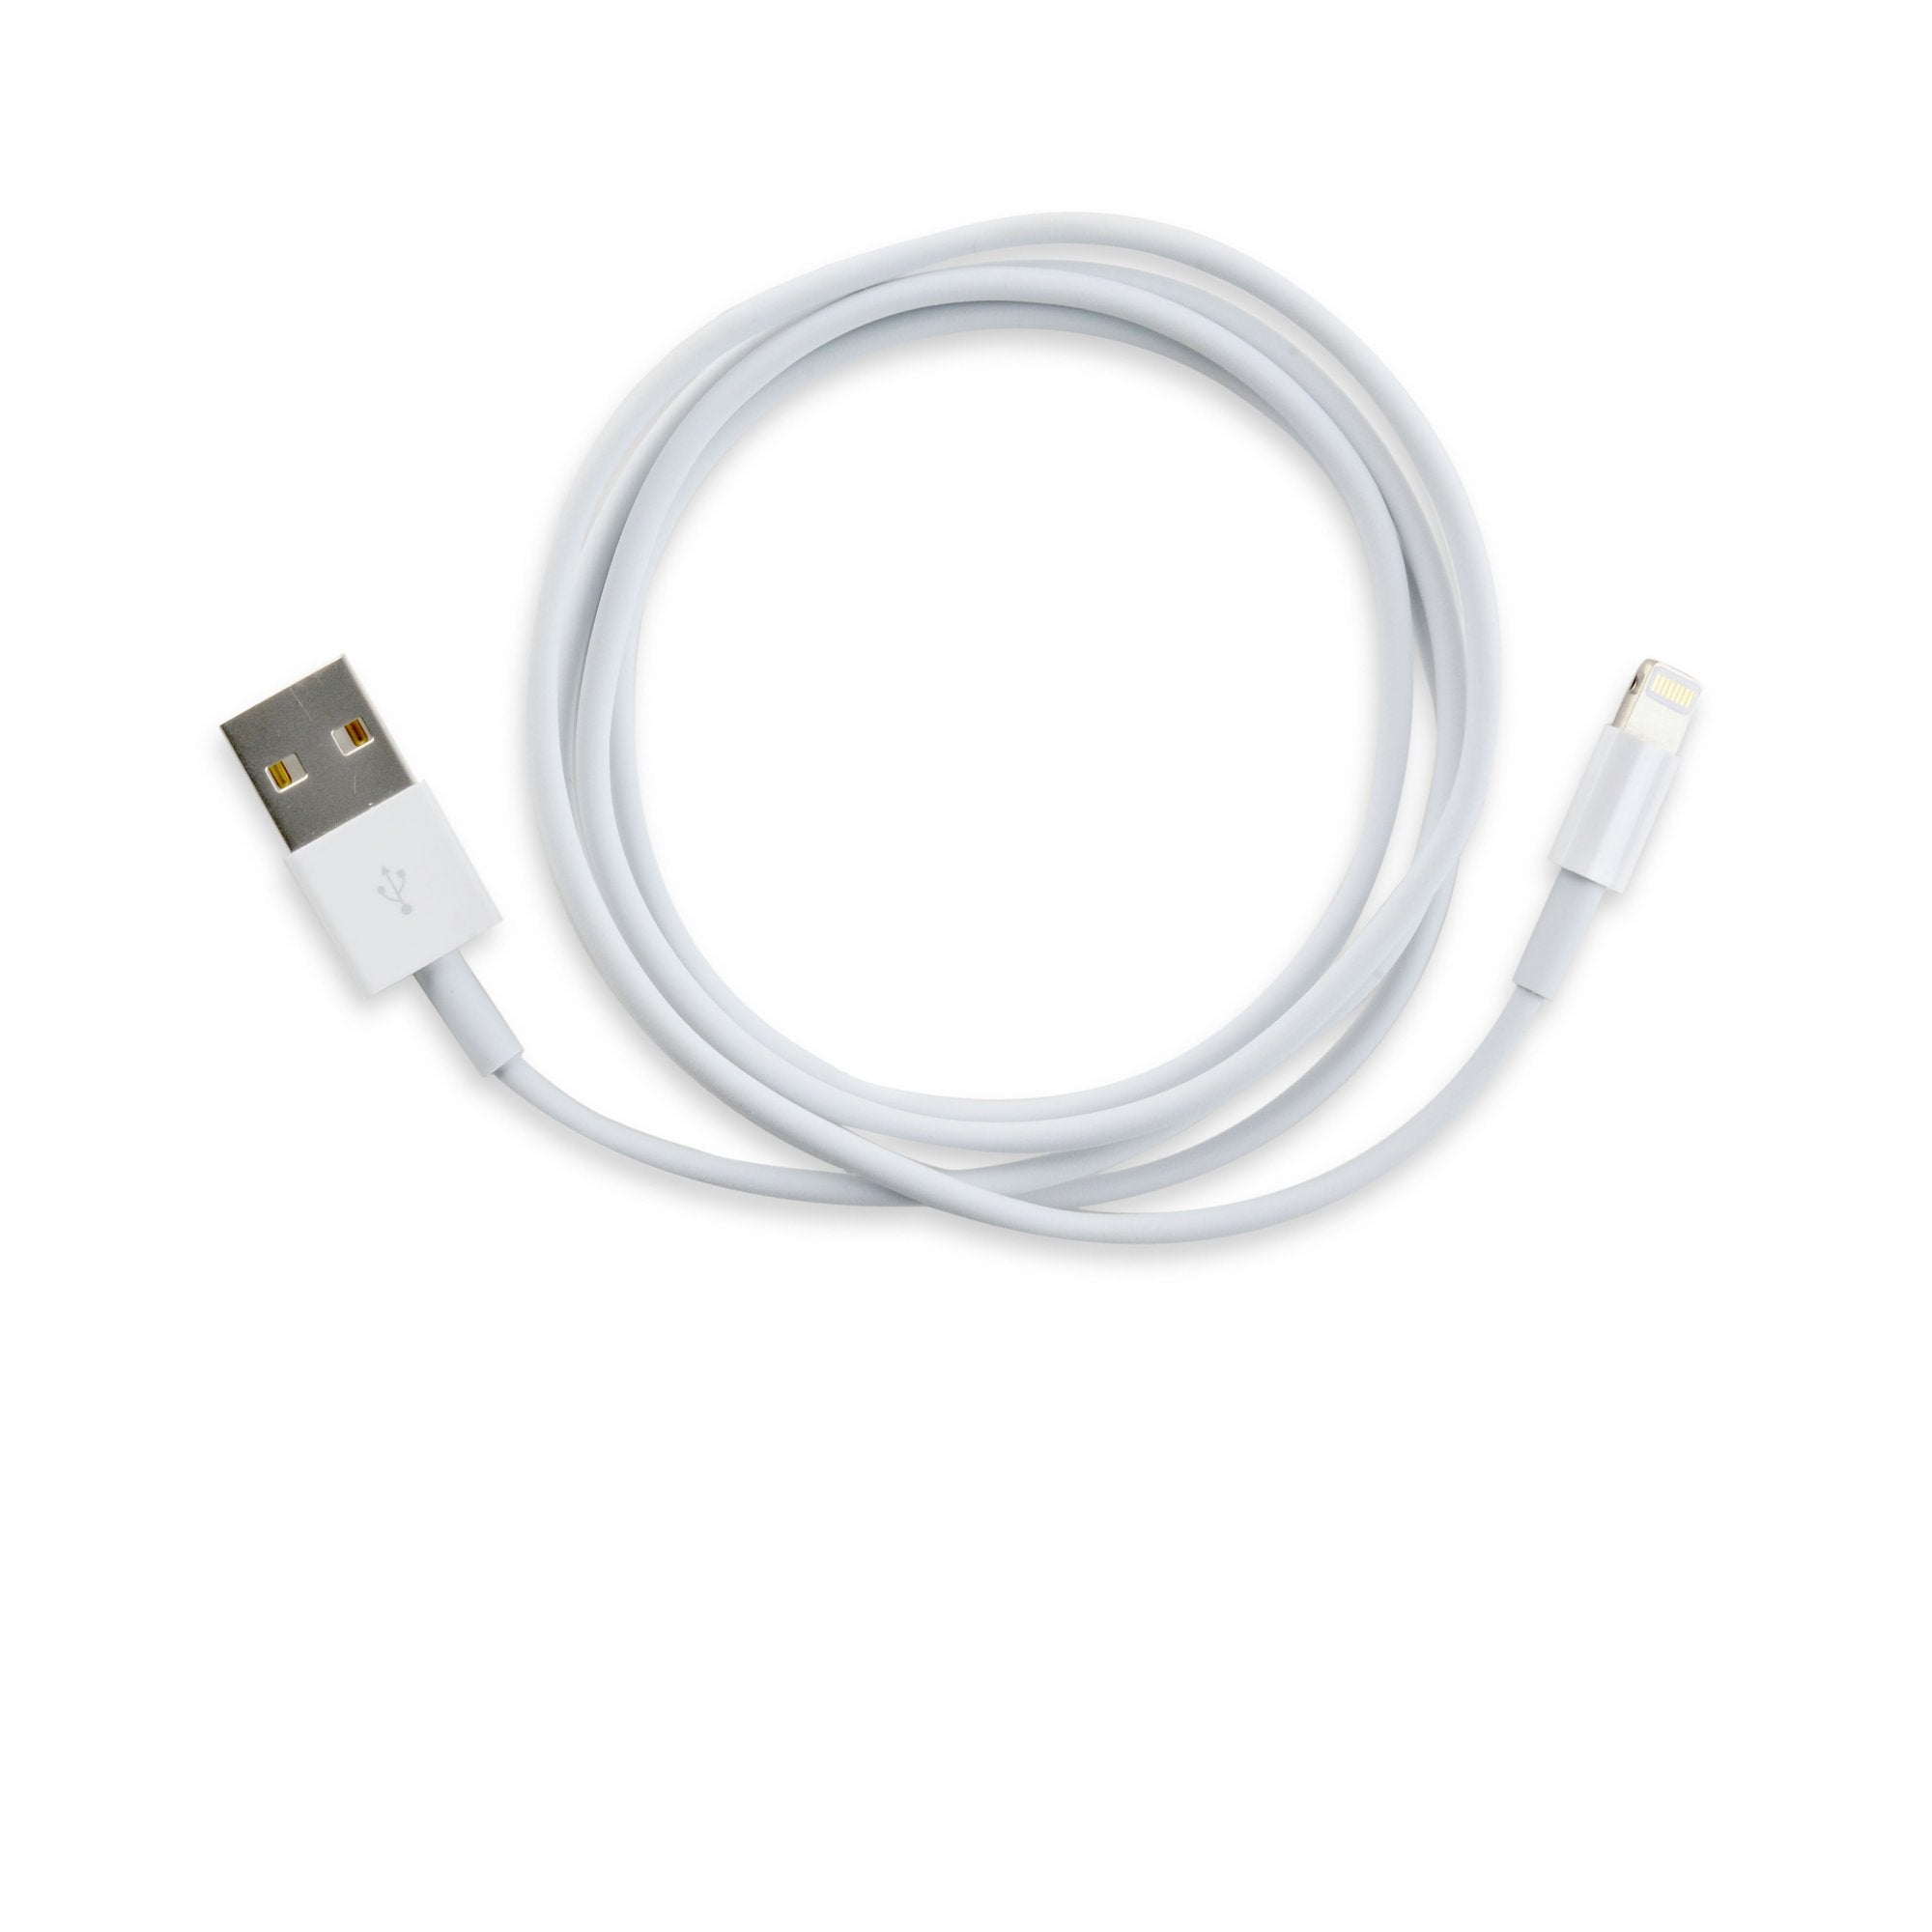 Lightning to USB Charging Cable Individual New 1 meter